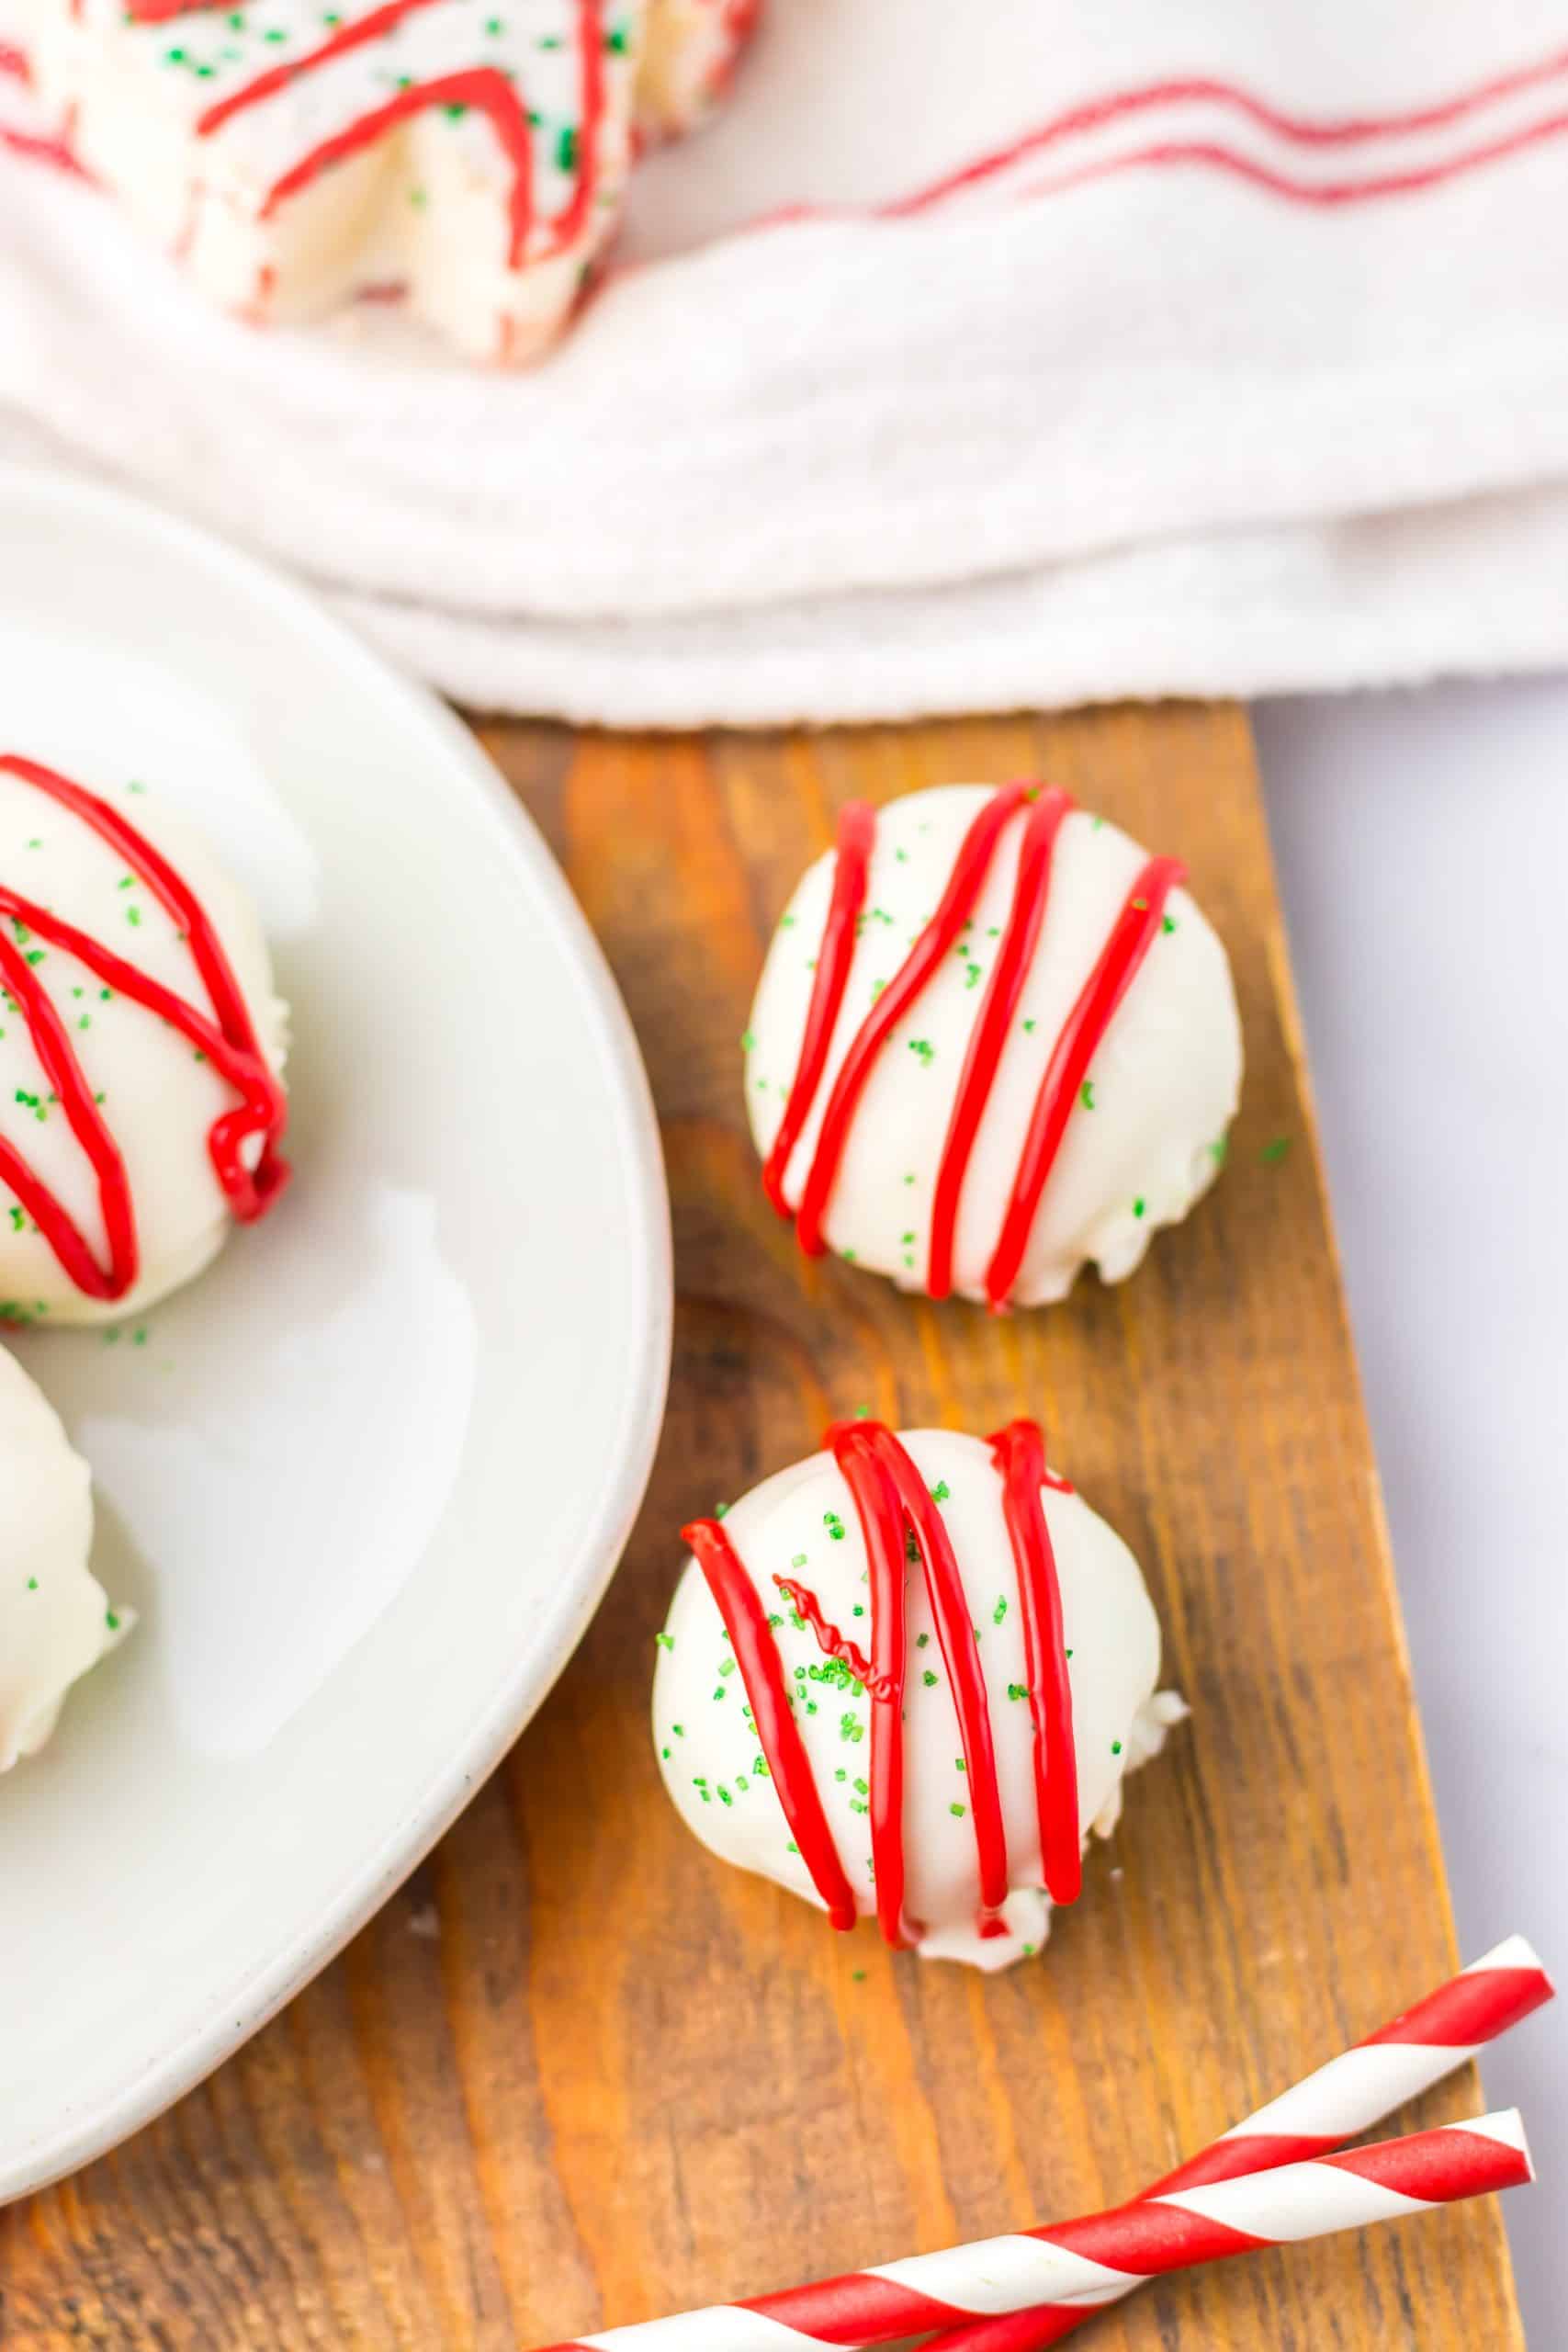 two little debbie christmas tree cake balls on a wooden cutting board